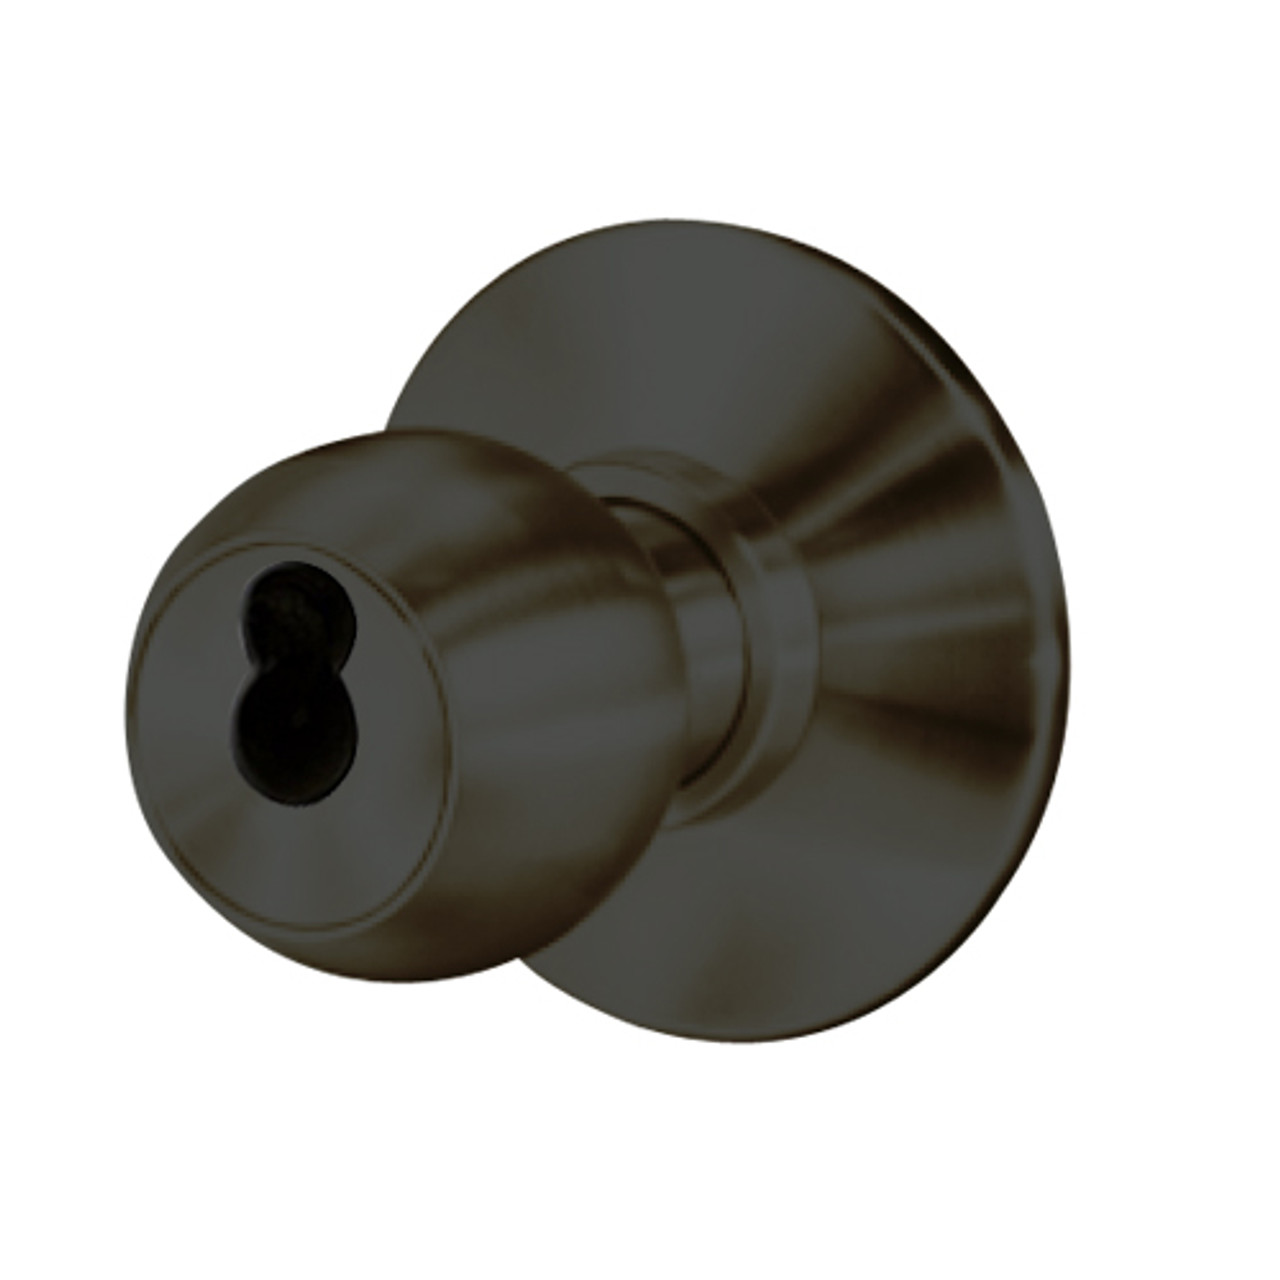 8K57YD4DSTK613 Best 8K Series Exit Heavy Duty Cylindrical Knob Locks with Round Style in Oil Rubbed Bronze